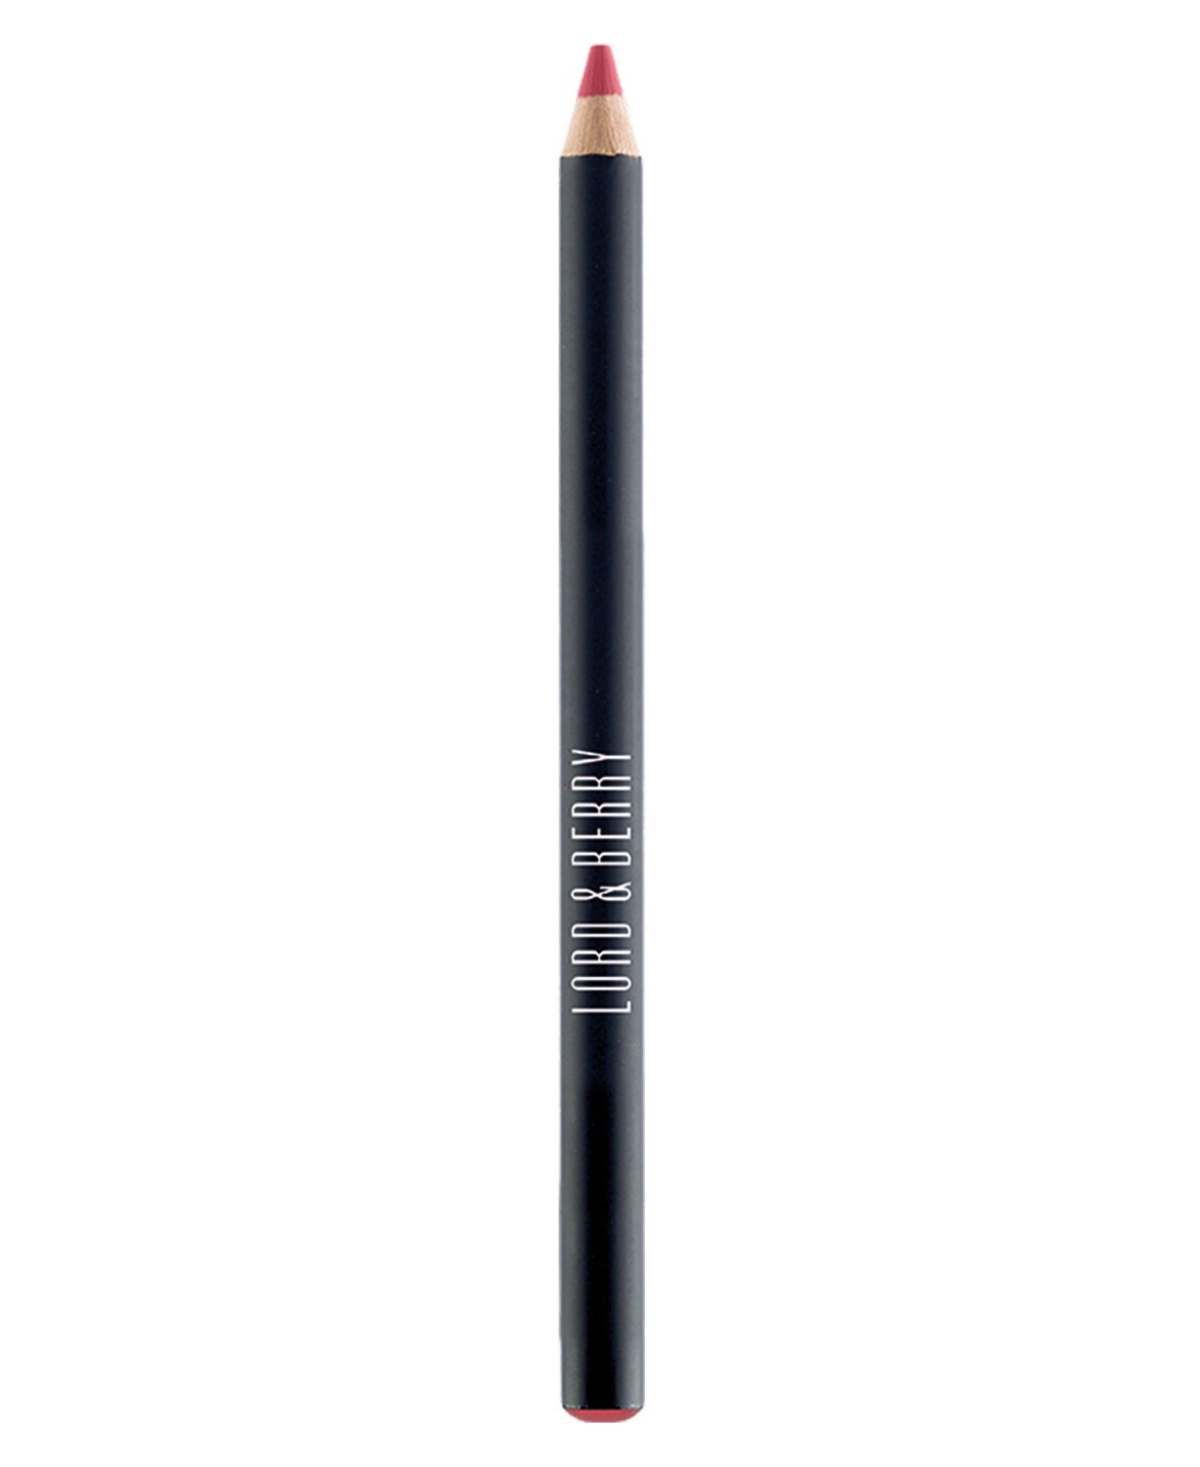 Lord & Berry Ultimate Lip Liner In Whisper Pink - Soft Pink